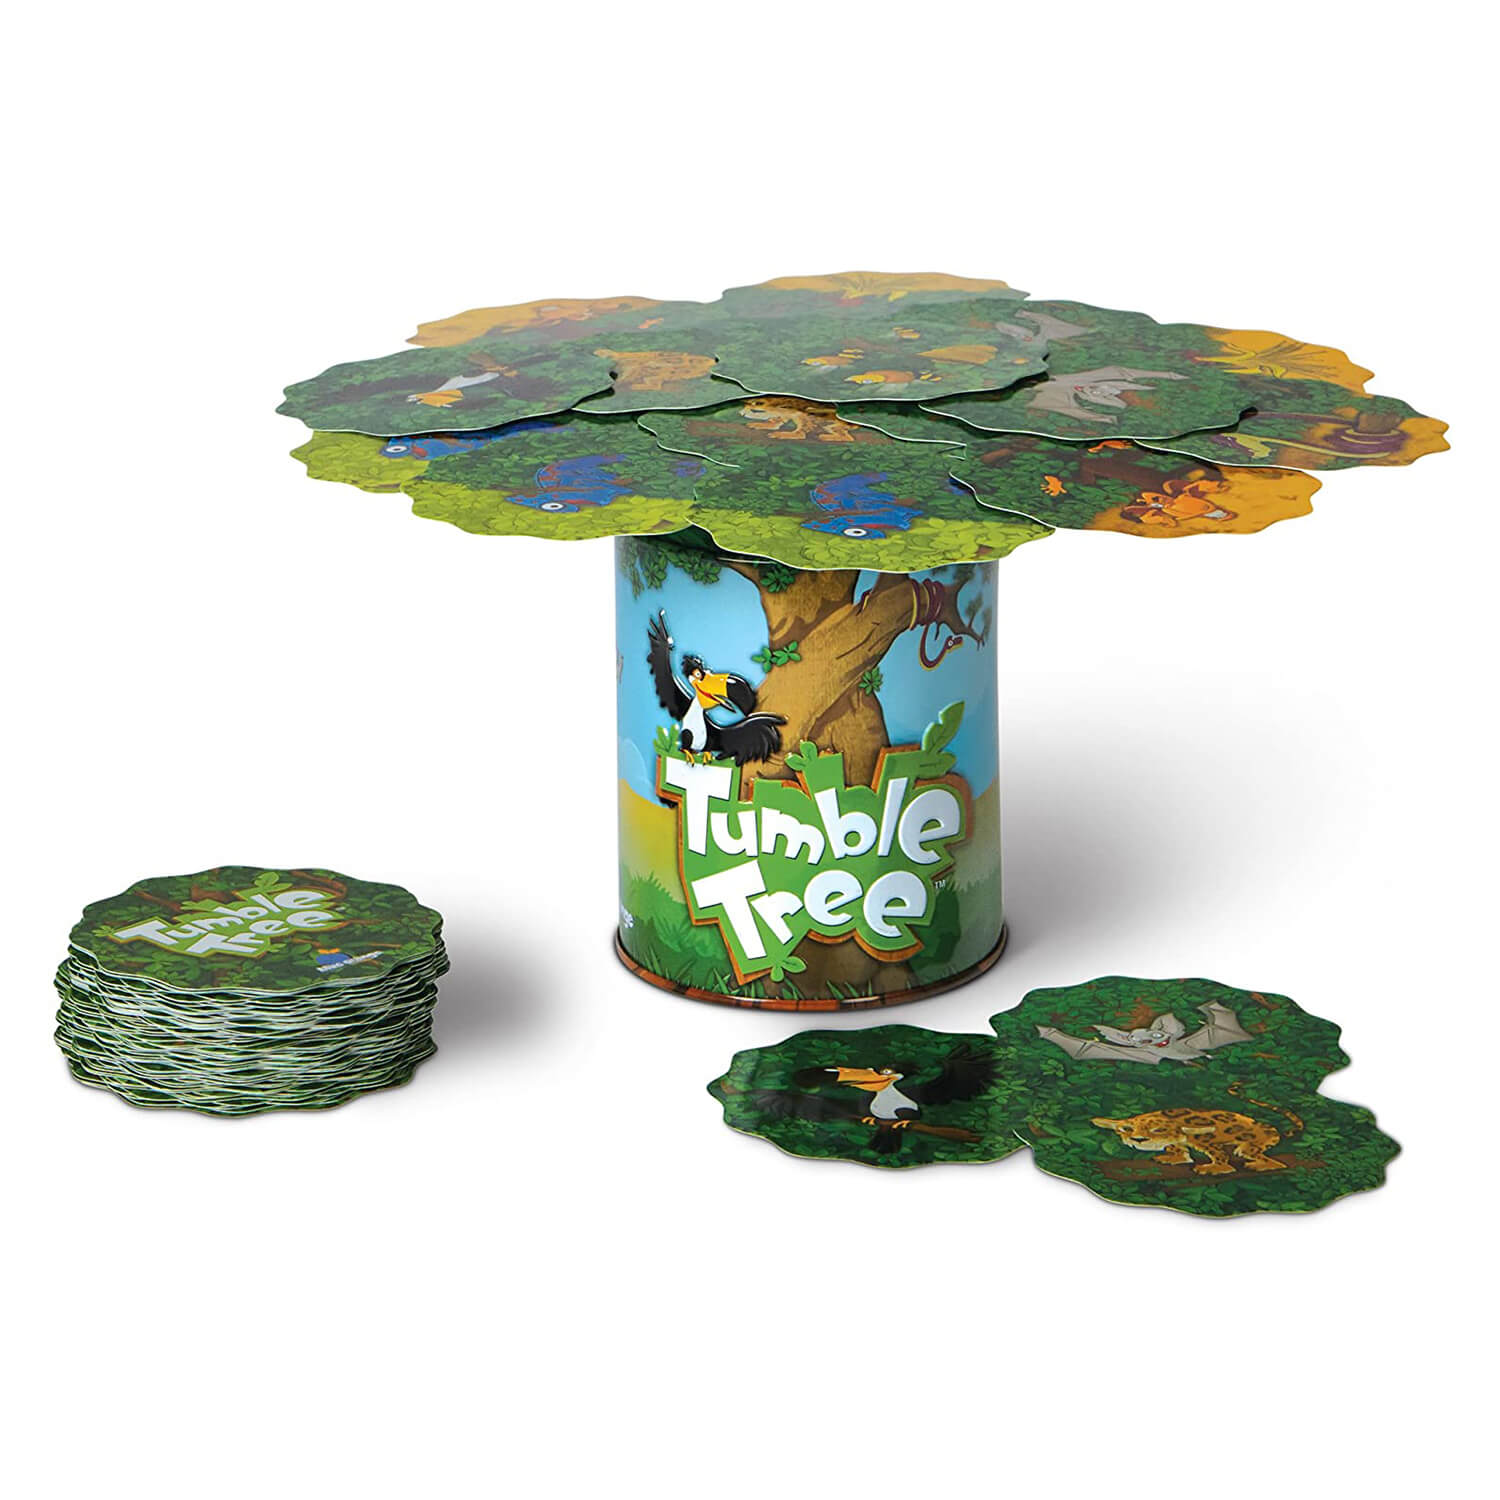 Blue Orange Tumble Tree Game cards and pieces set up.